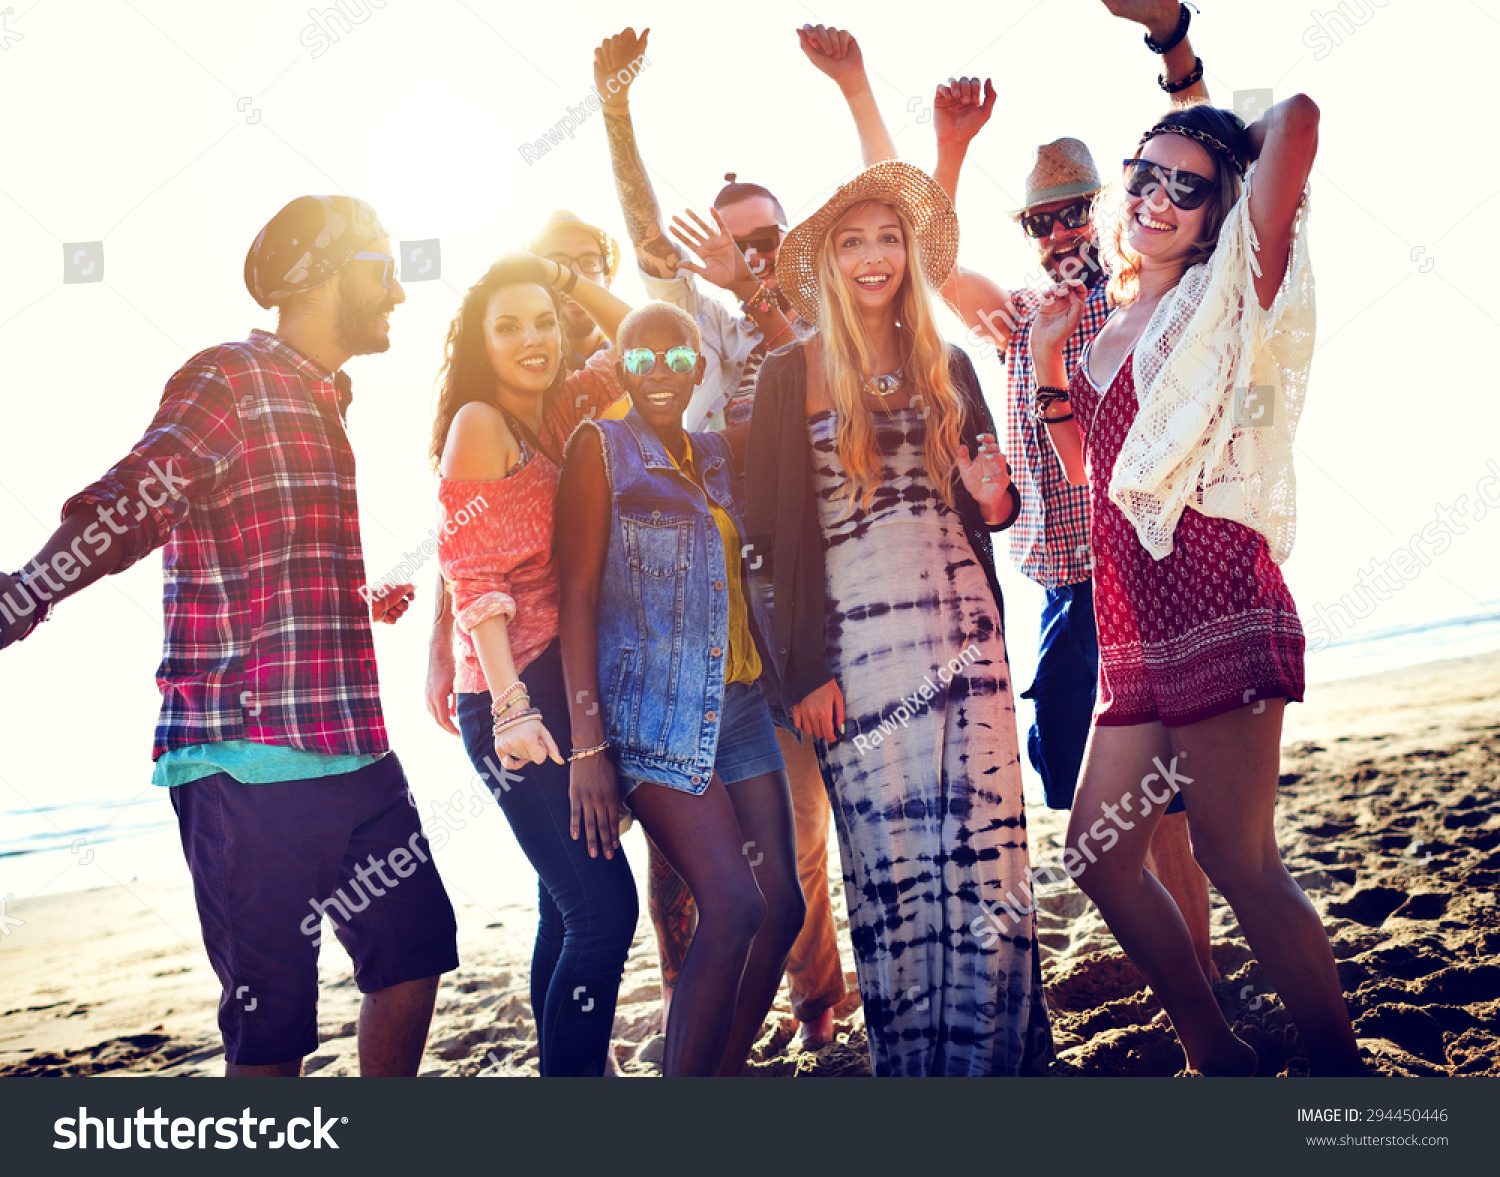 Teenagers Friends Beach Party Happiness Concept #294450446